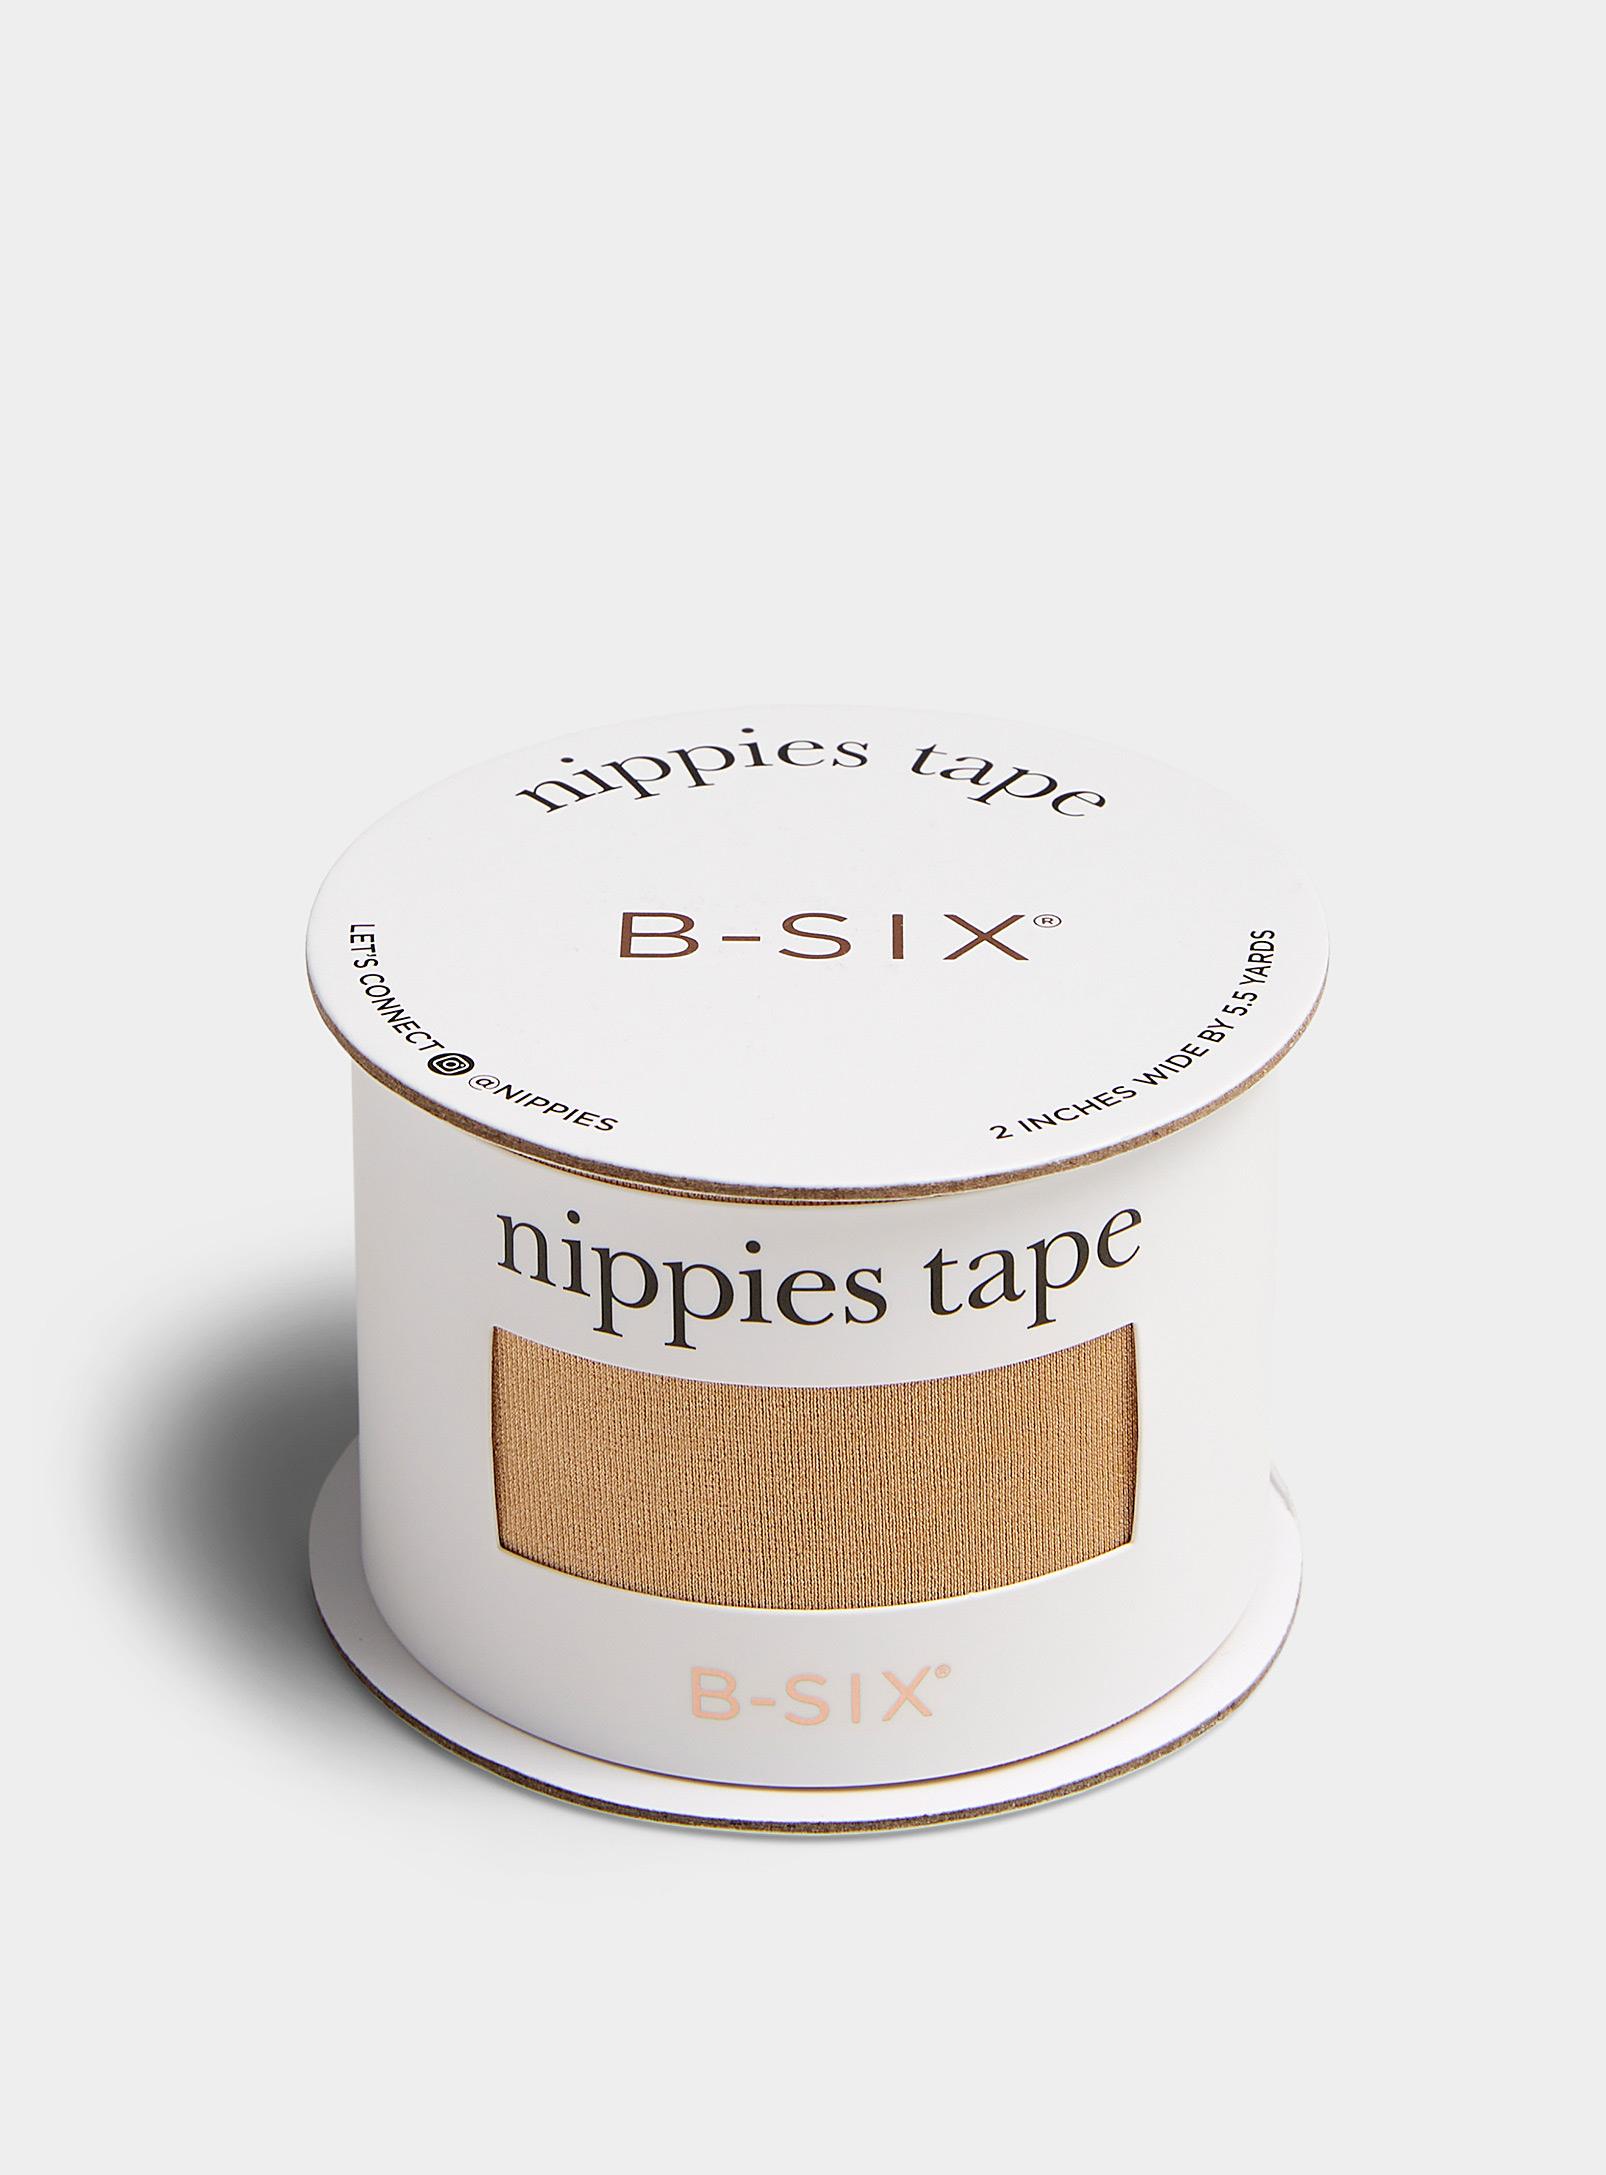 Nippies - Women's Adhesive support band